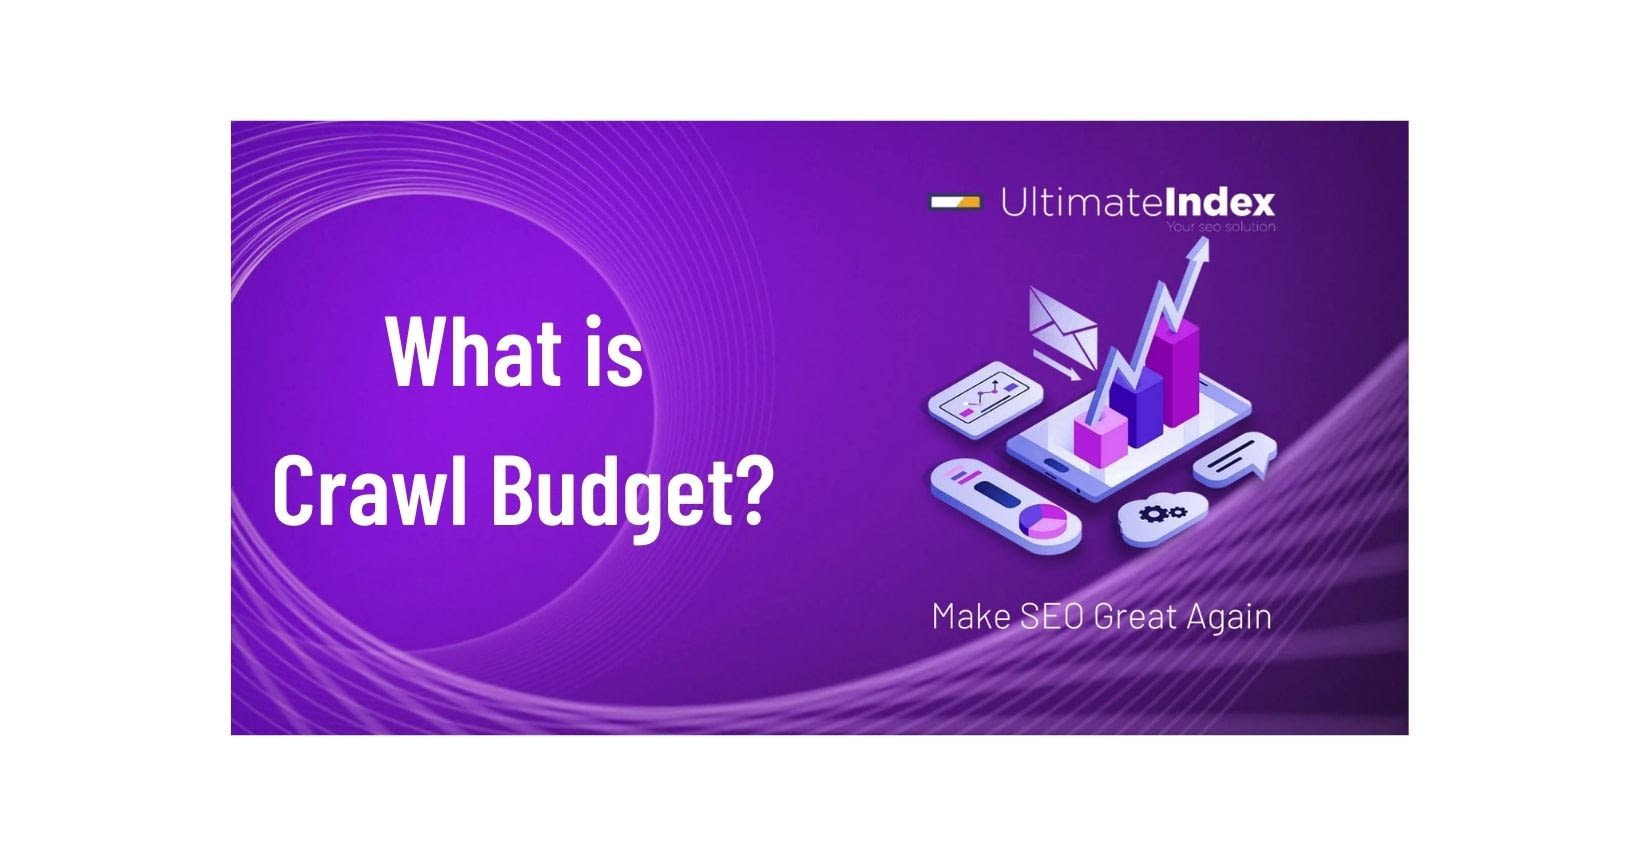 What is Crawl Budget